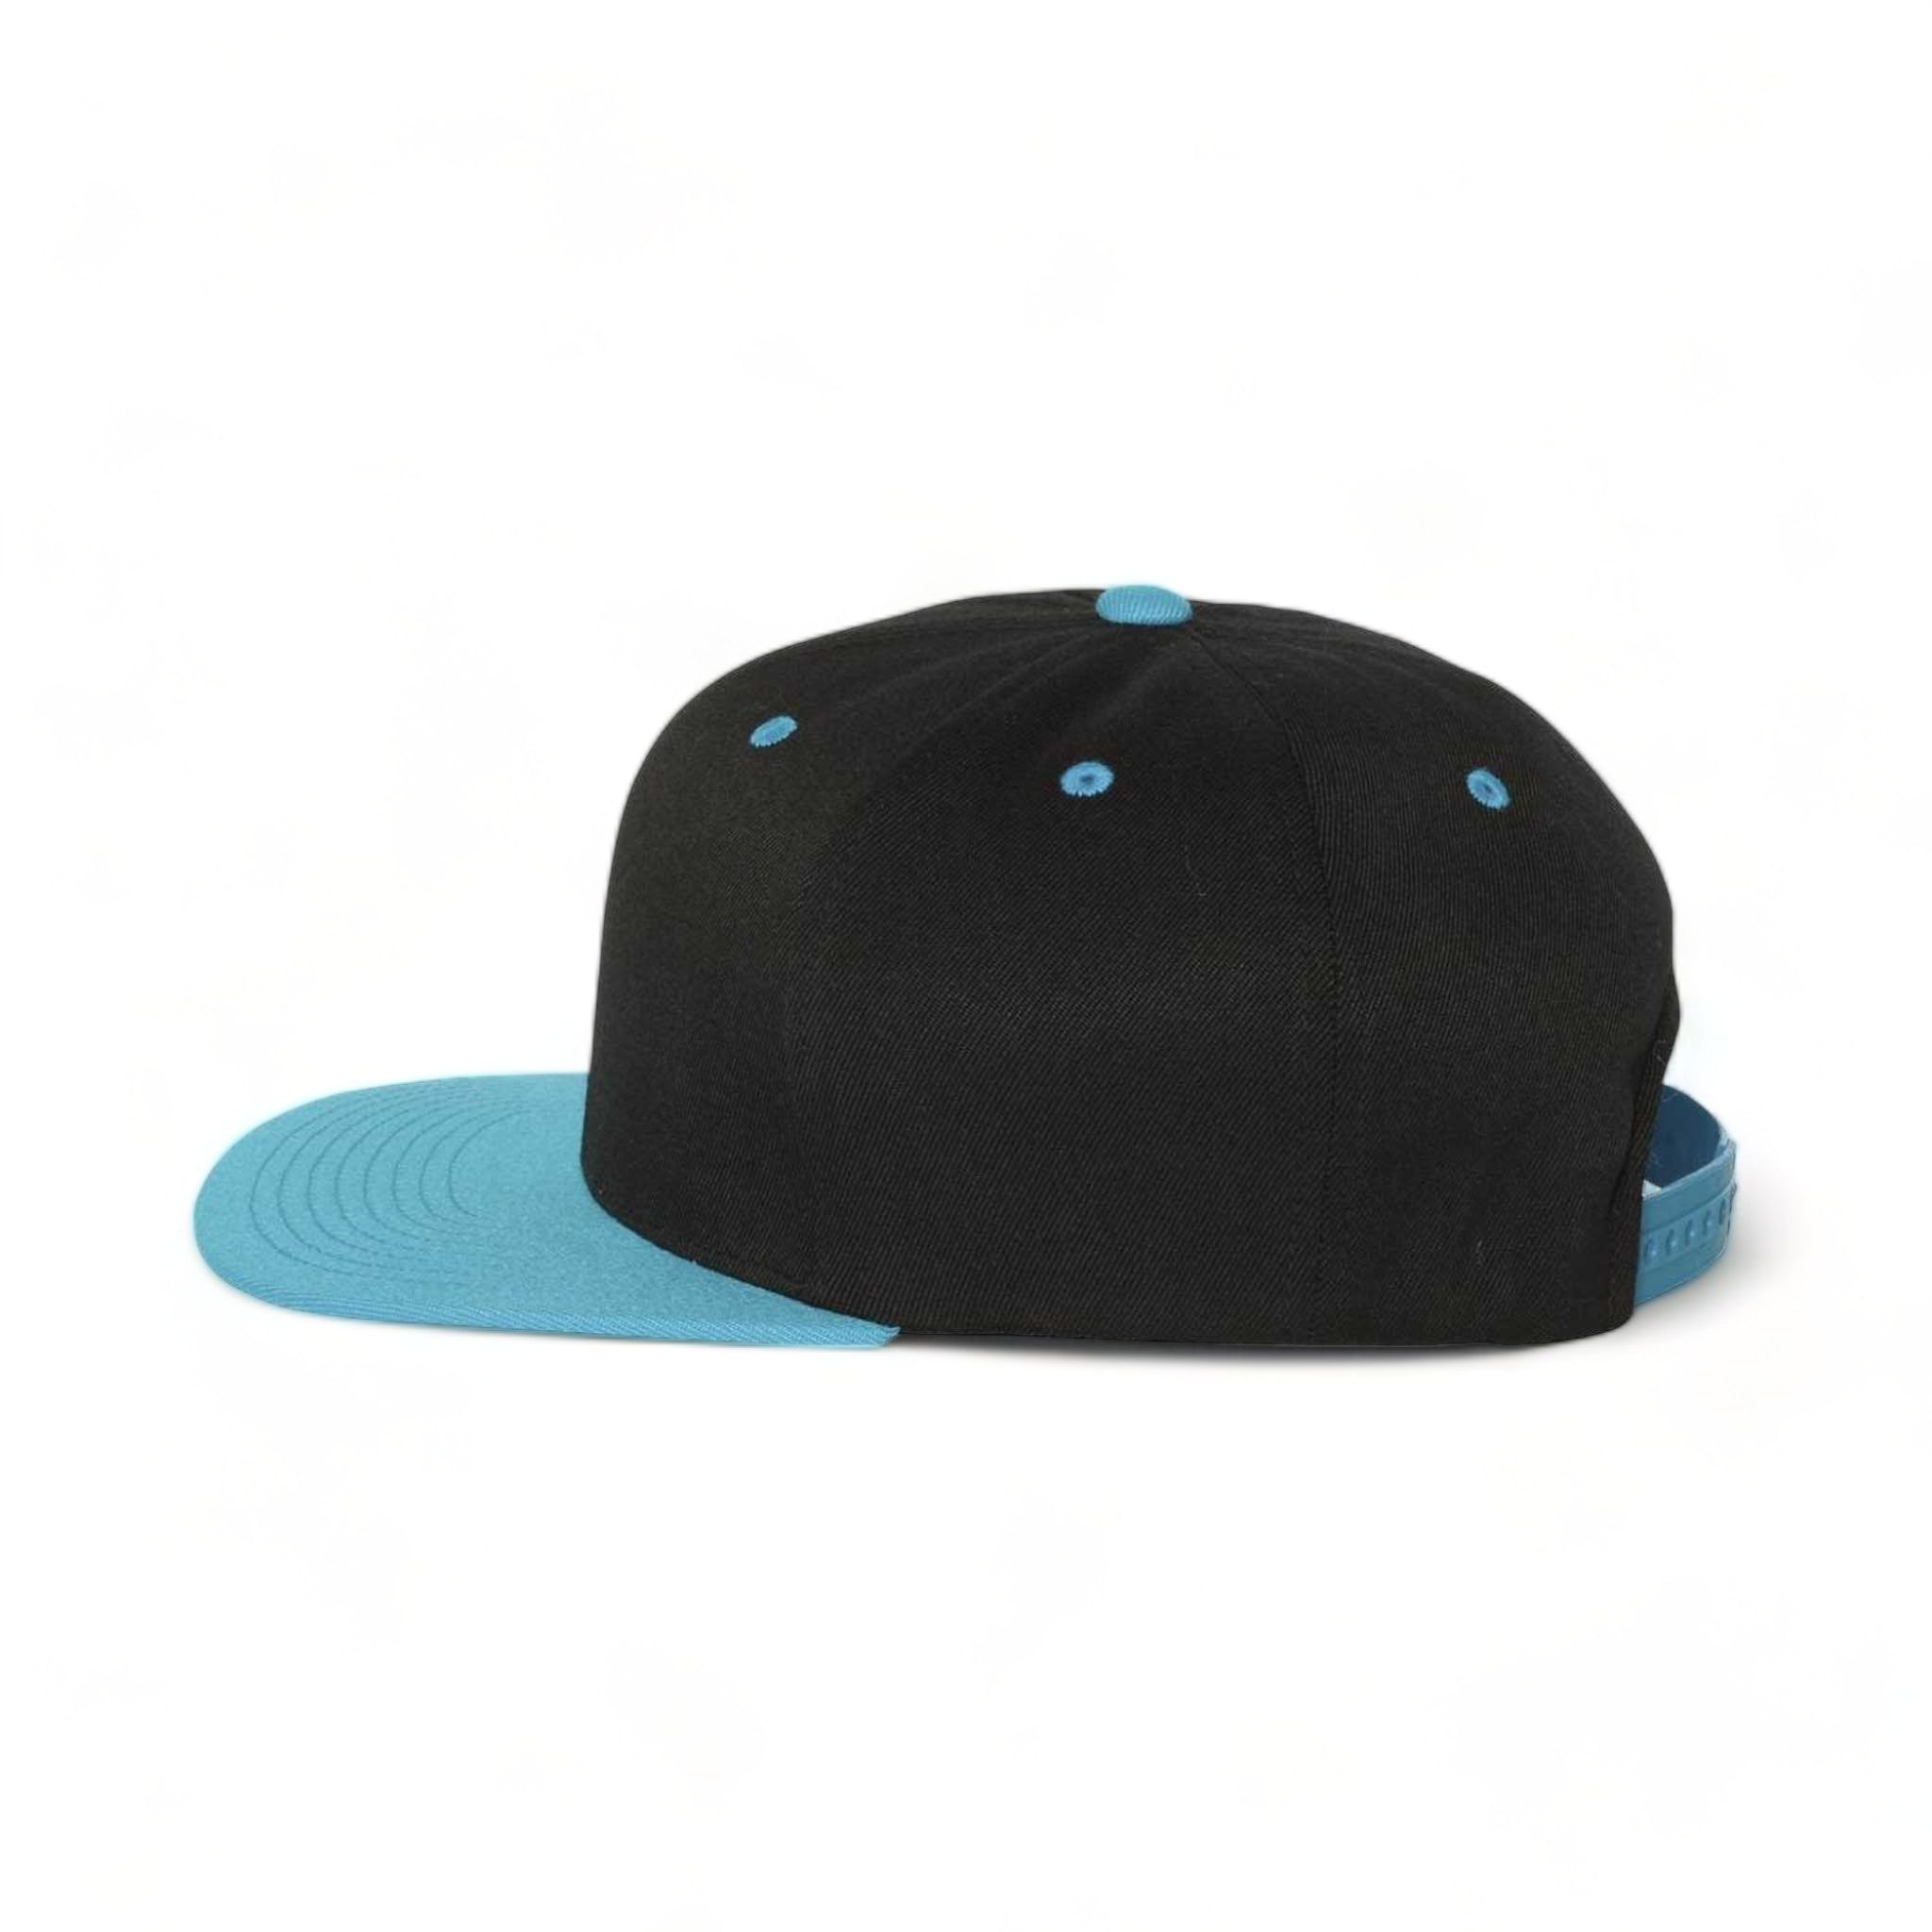 Side view of Flexfit 110F custom hat in black and teal